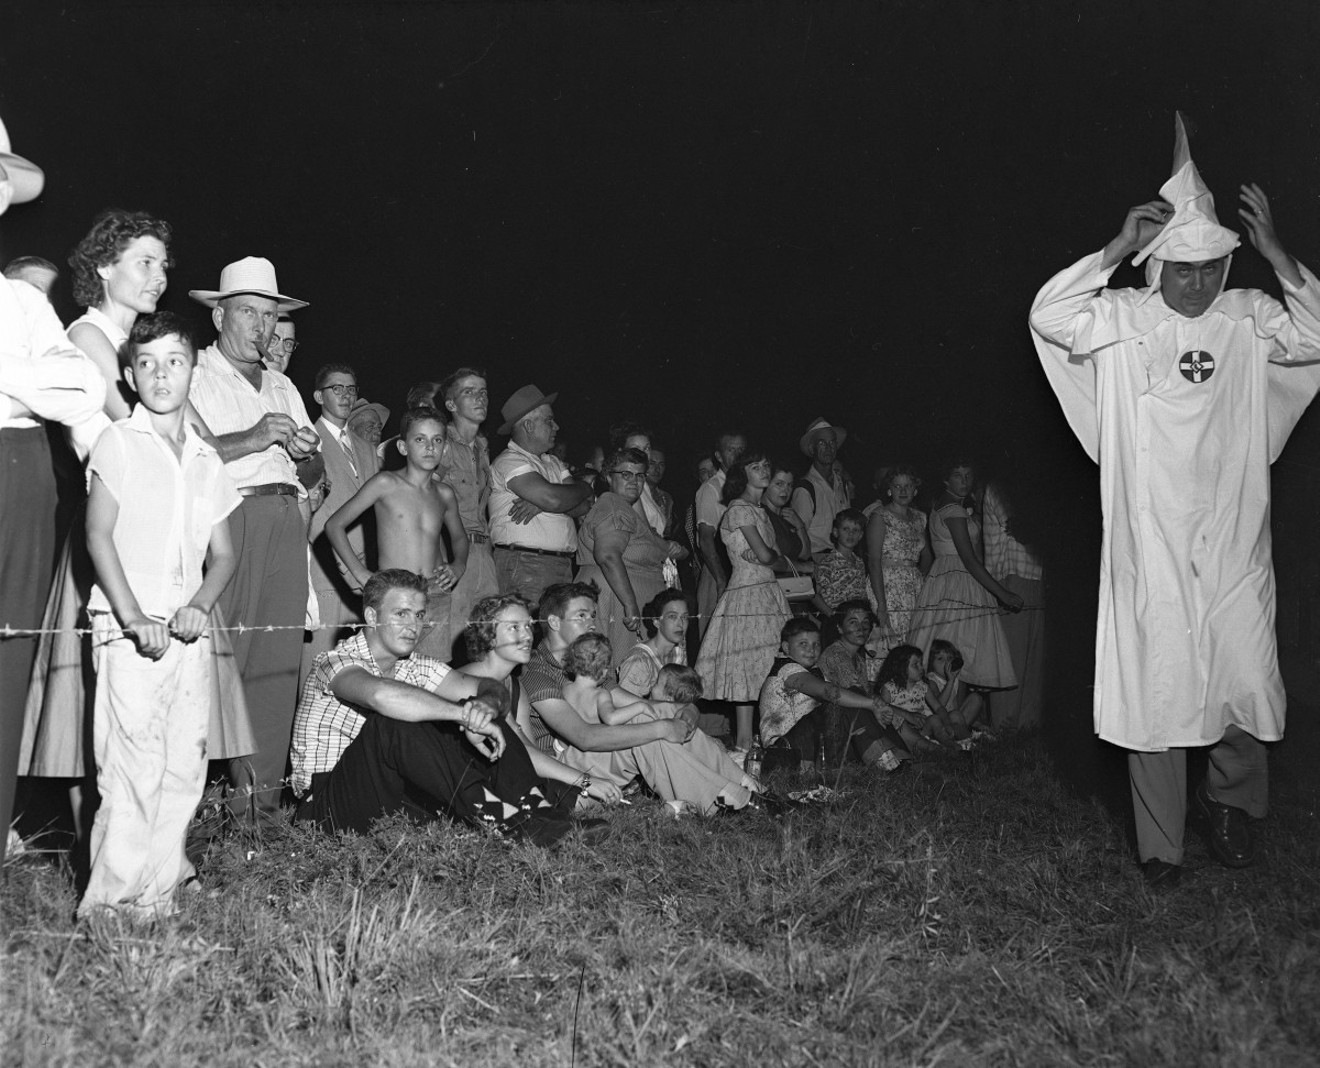 A Ku Klux Klan rally in Florida in 1956. See more photos of Florida's black history here.